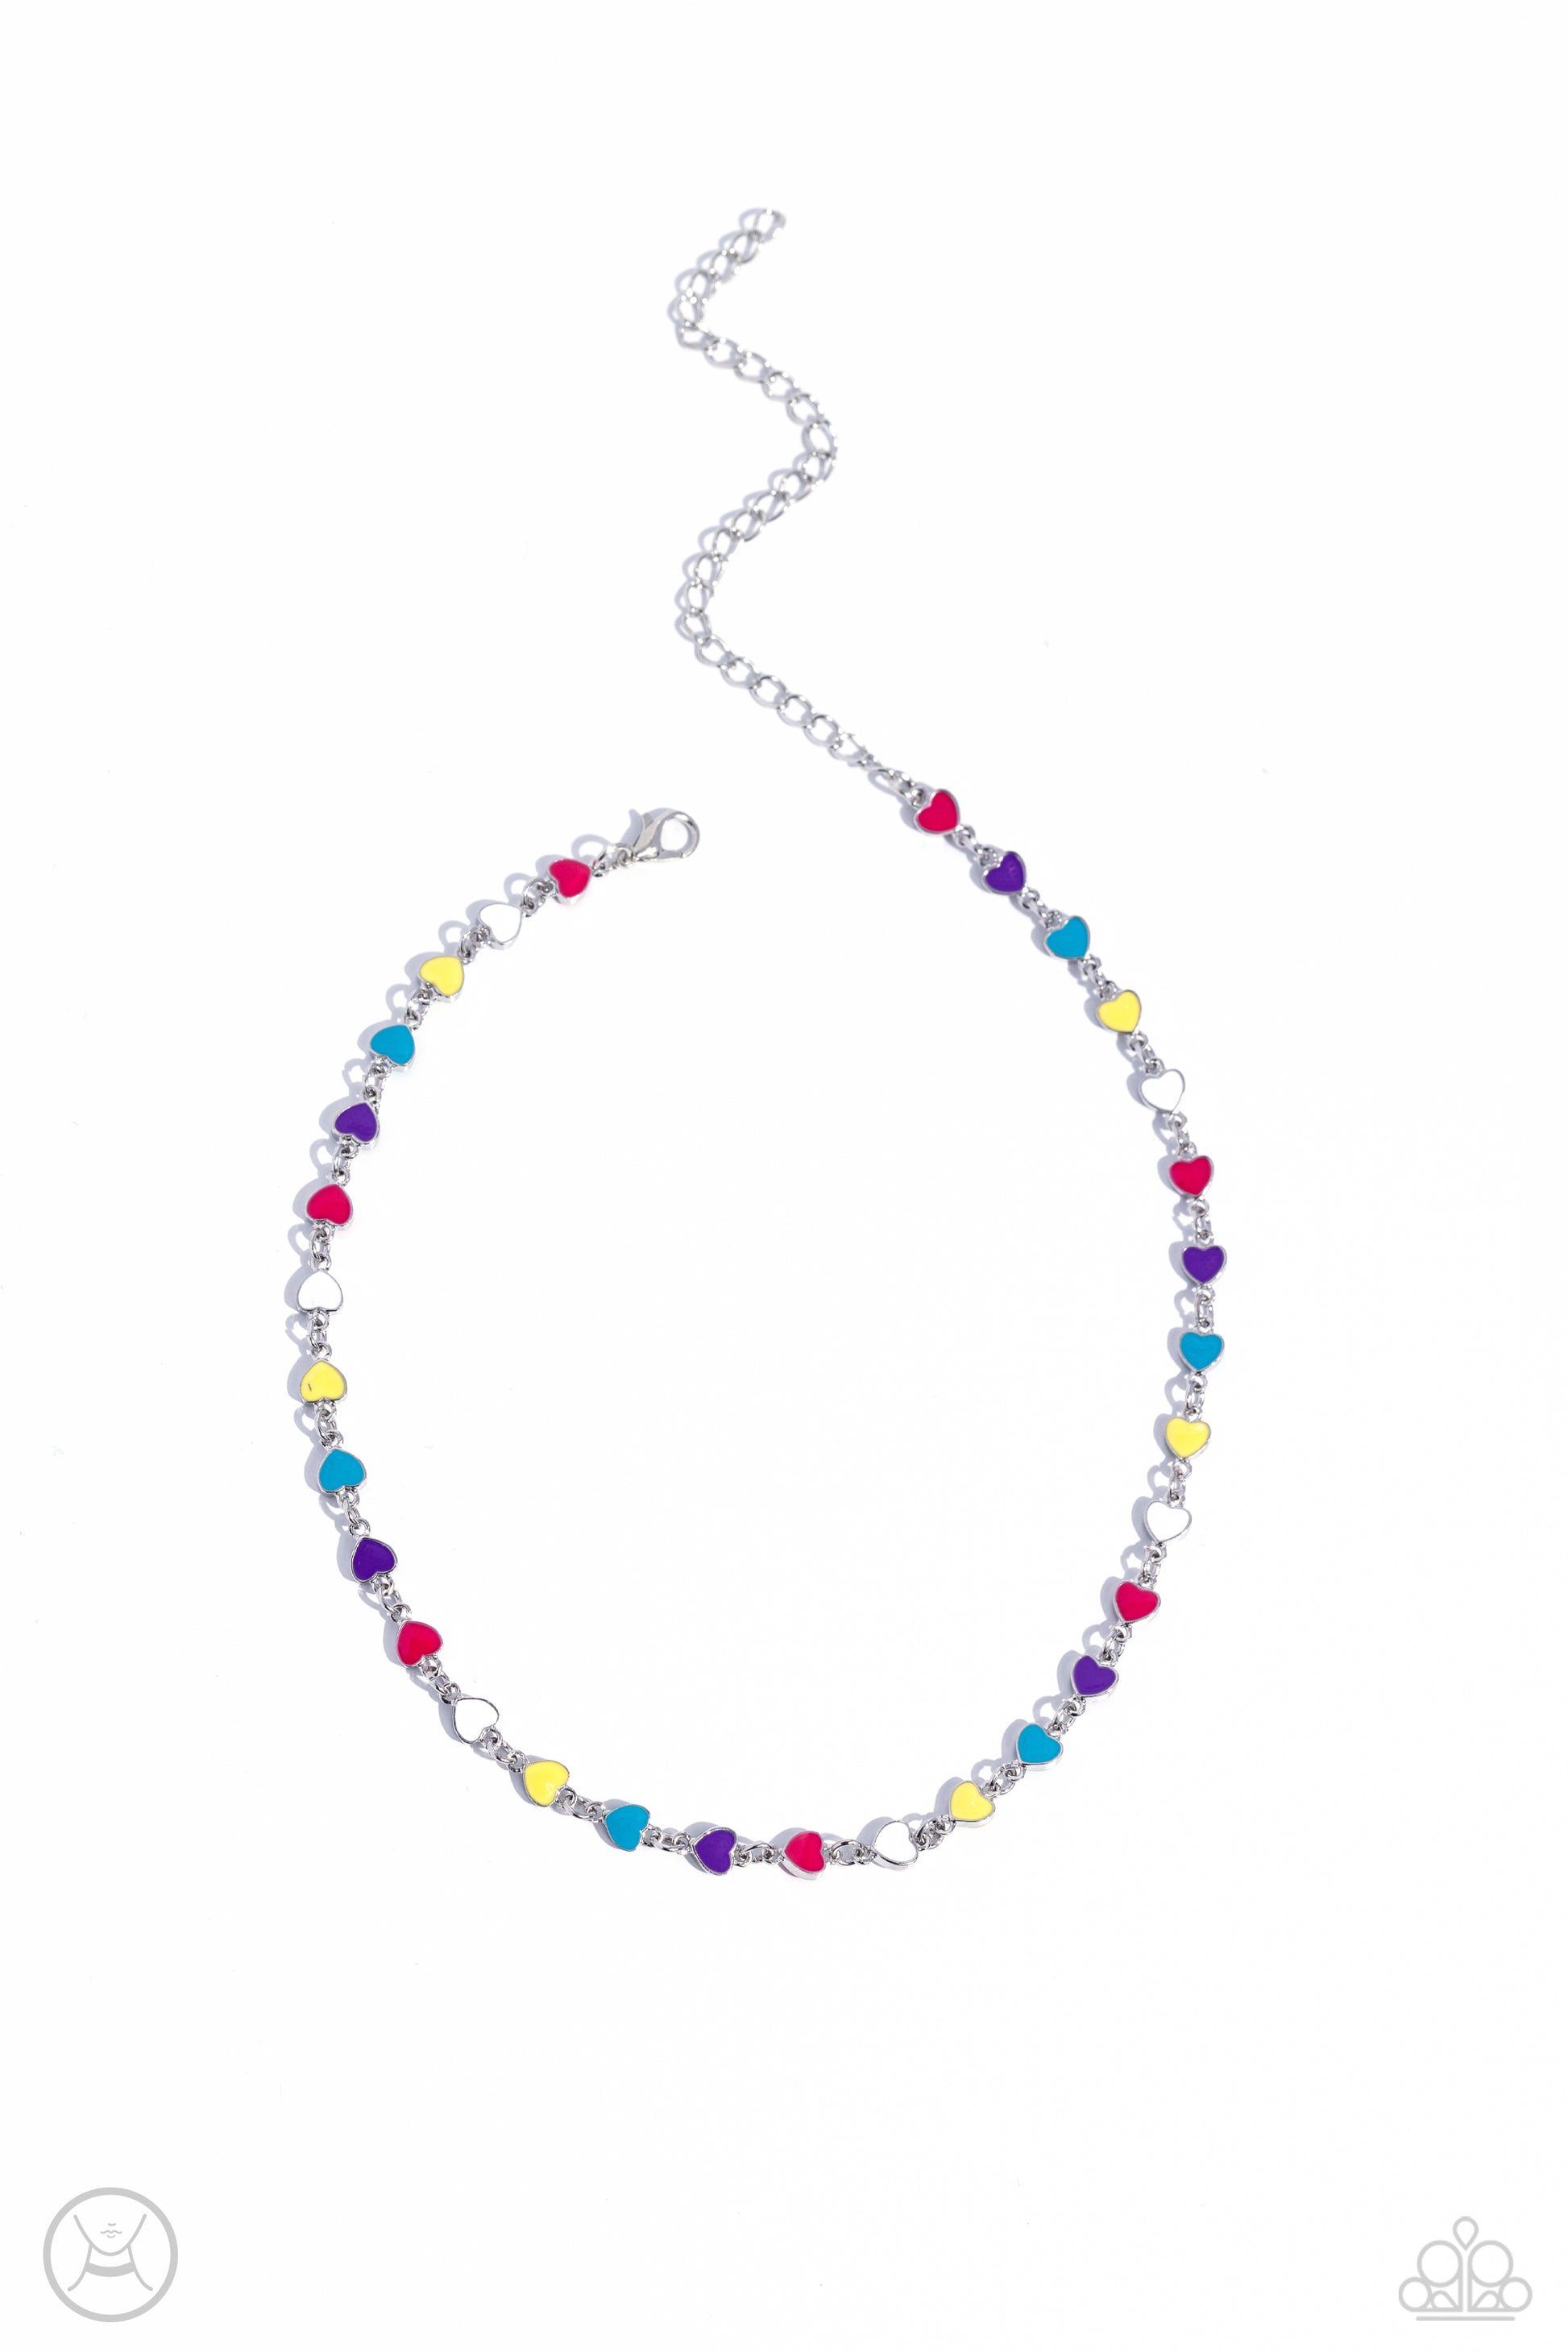 <p>Multicolored-painted silver hearts interconnect around the collar for a simply sentimental look. Features an adjustable clasp closure.</p> <p><i>Sold as one individual choker necklace. Includes one pair of matching earrings. </i></p> &nbsp;<img src="https://d9b54x484lq62.cloudfront.net/paparazzi/shopping/images/517_chokericon_1.jpg" alt="Choker" align="middle" height="50" width="50">